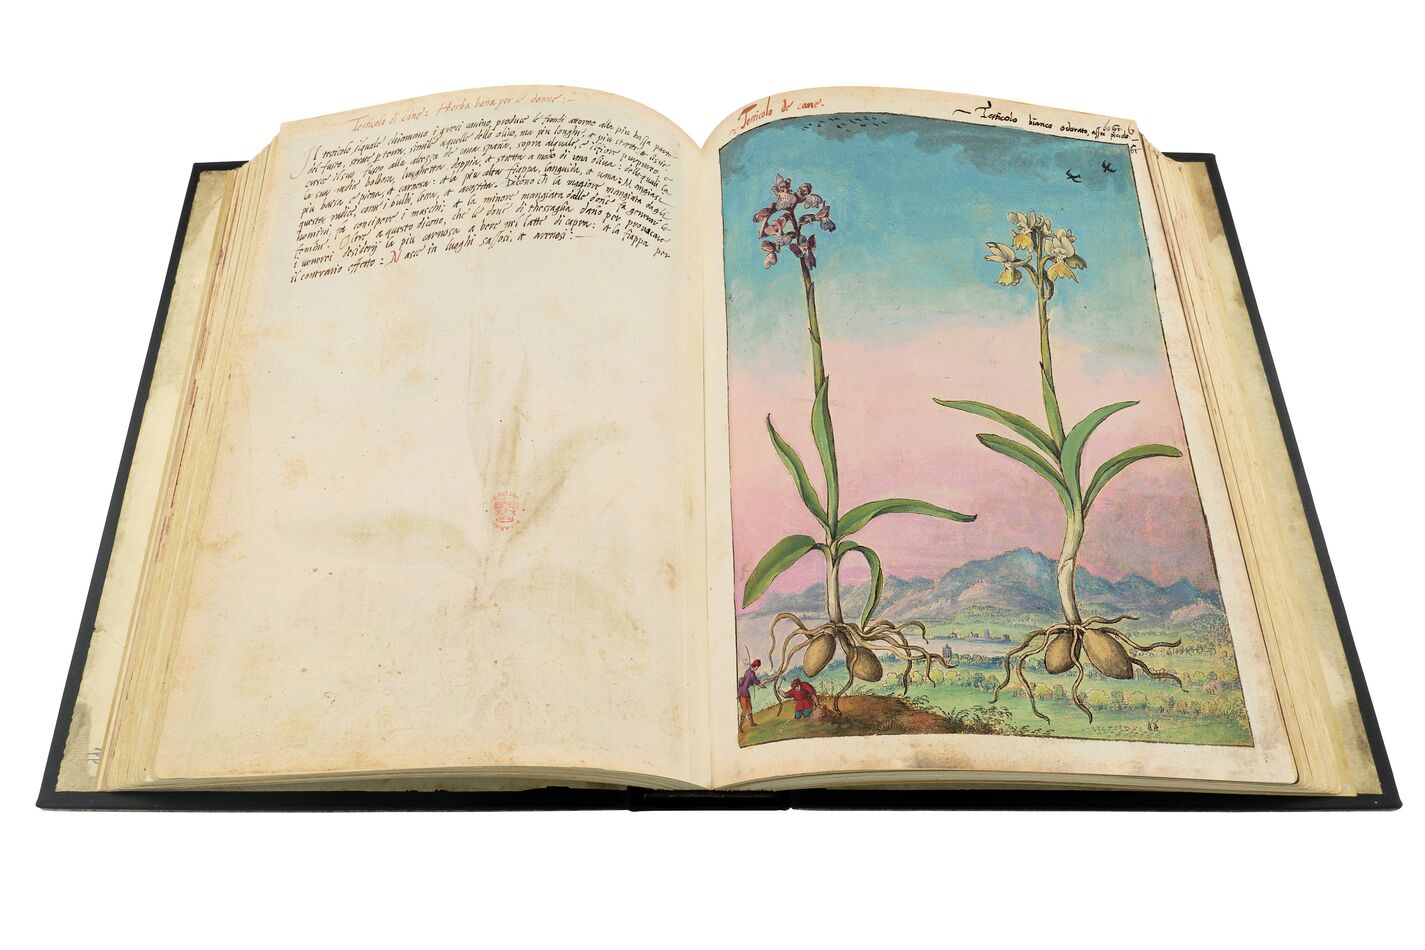 Orchids (Orchis spitzelii and Orchis provincialis), ff. 63v-64r